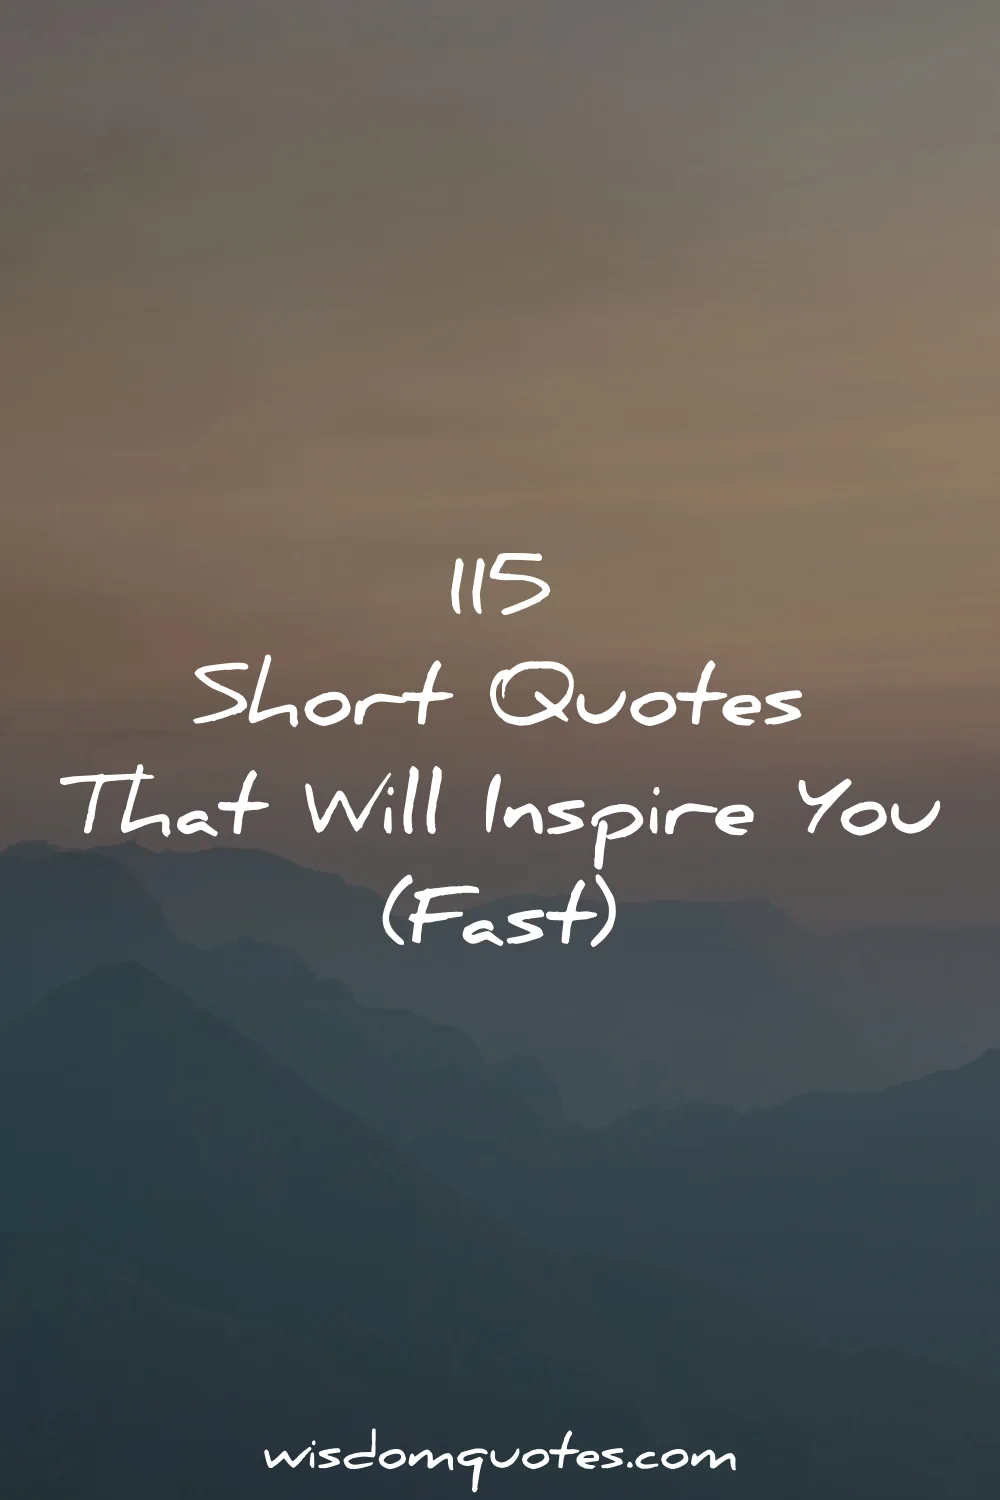 short quotes that-will inspire you fast wisdom